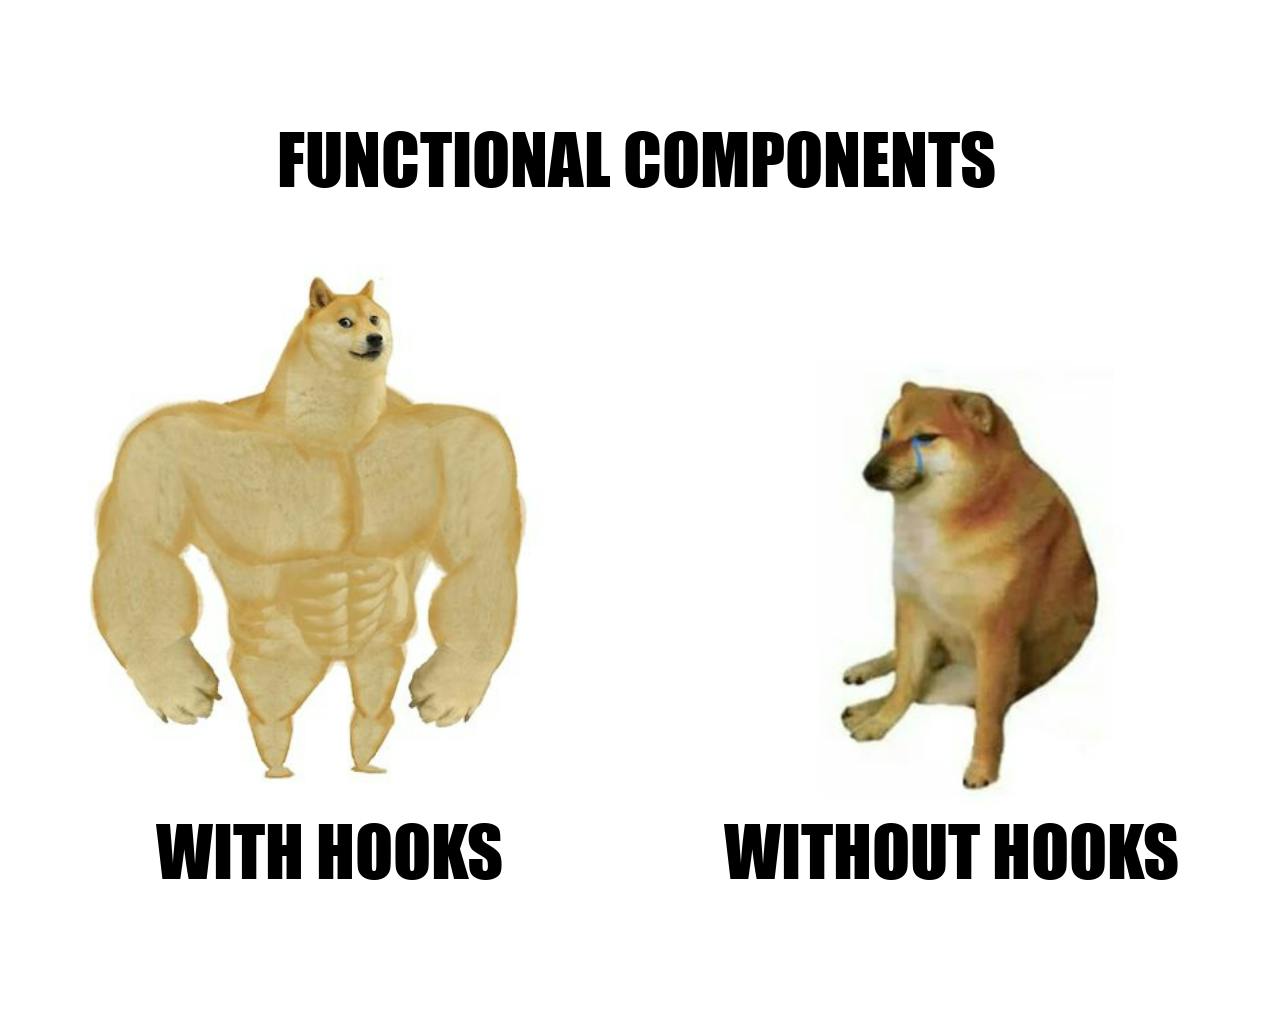 Functional components with and without hooks